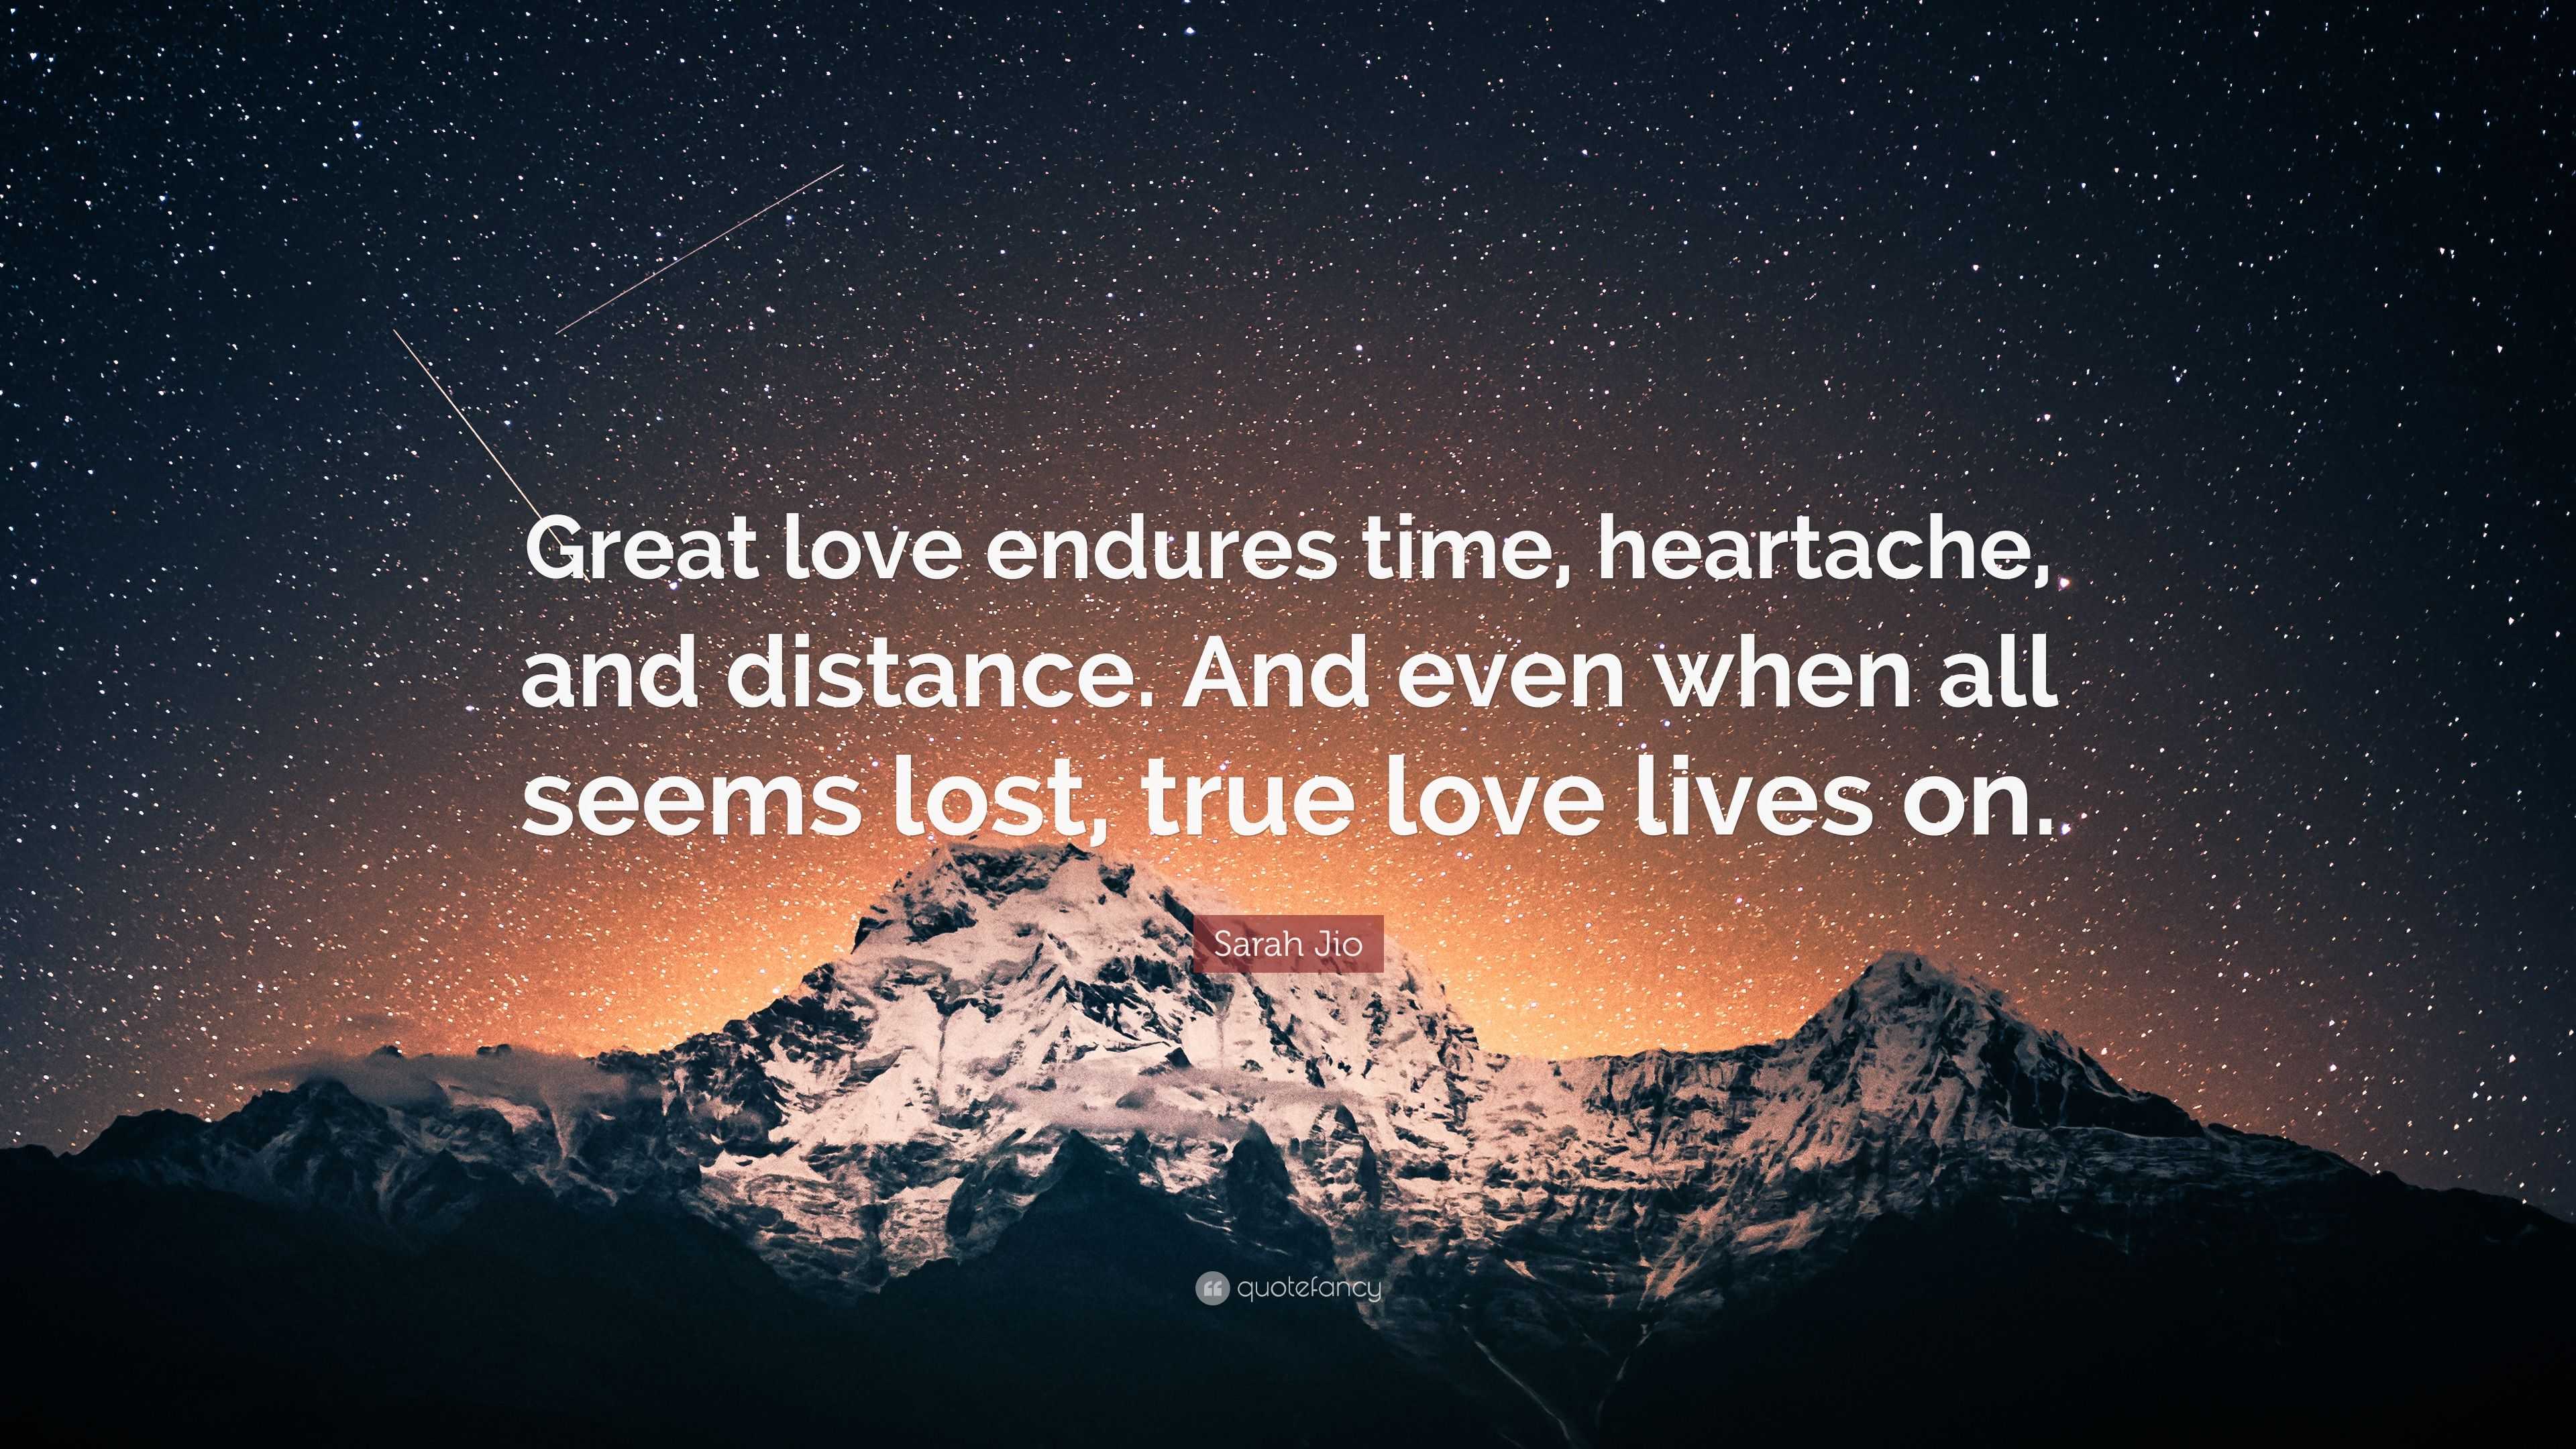 Sarah Jio Quote “Great love endures time heartache and distance And